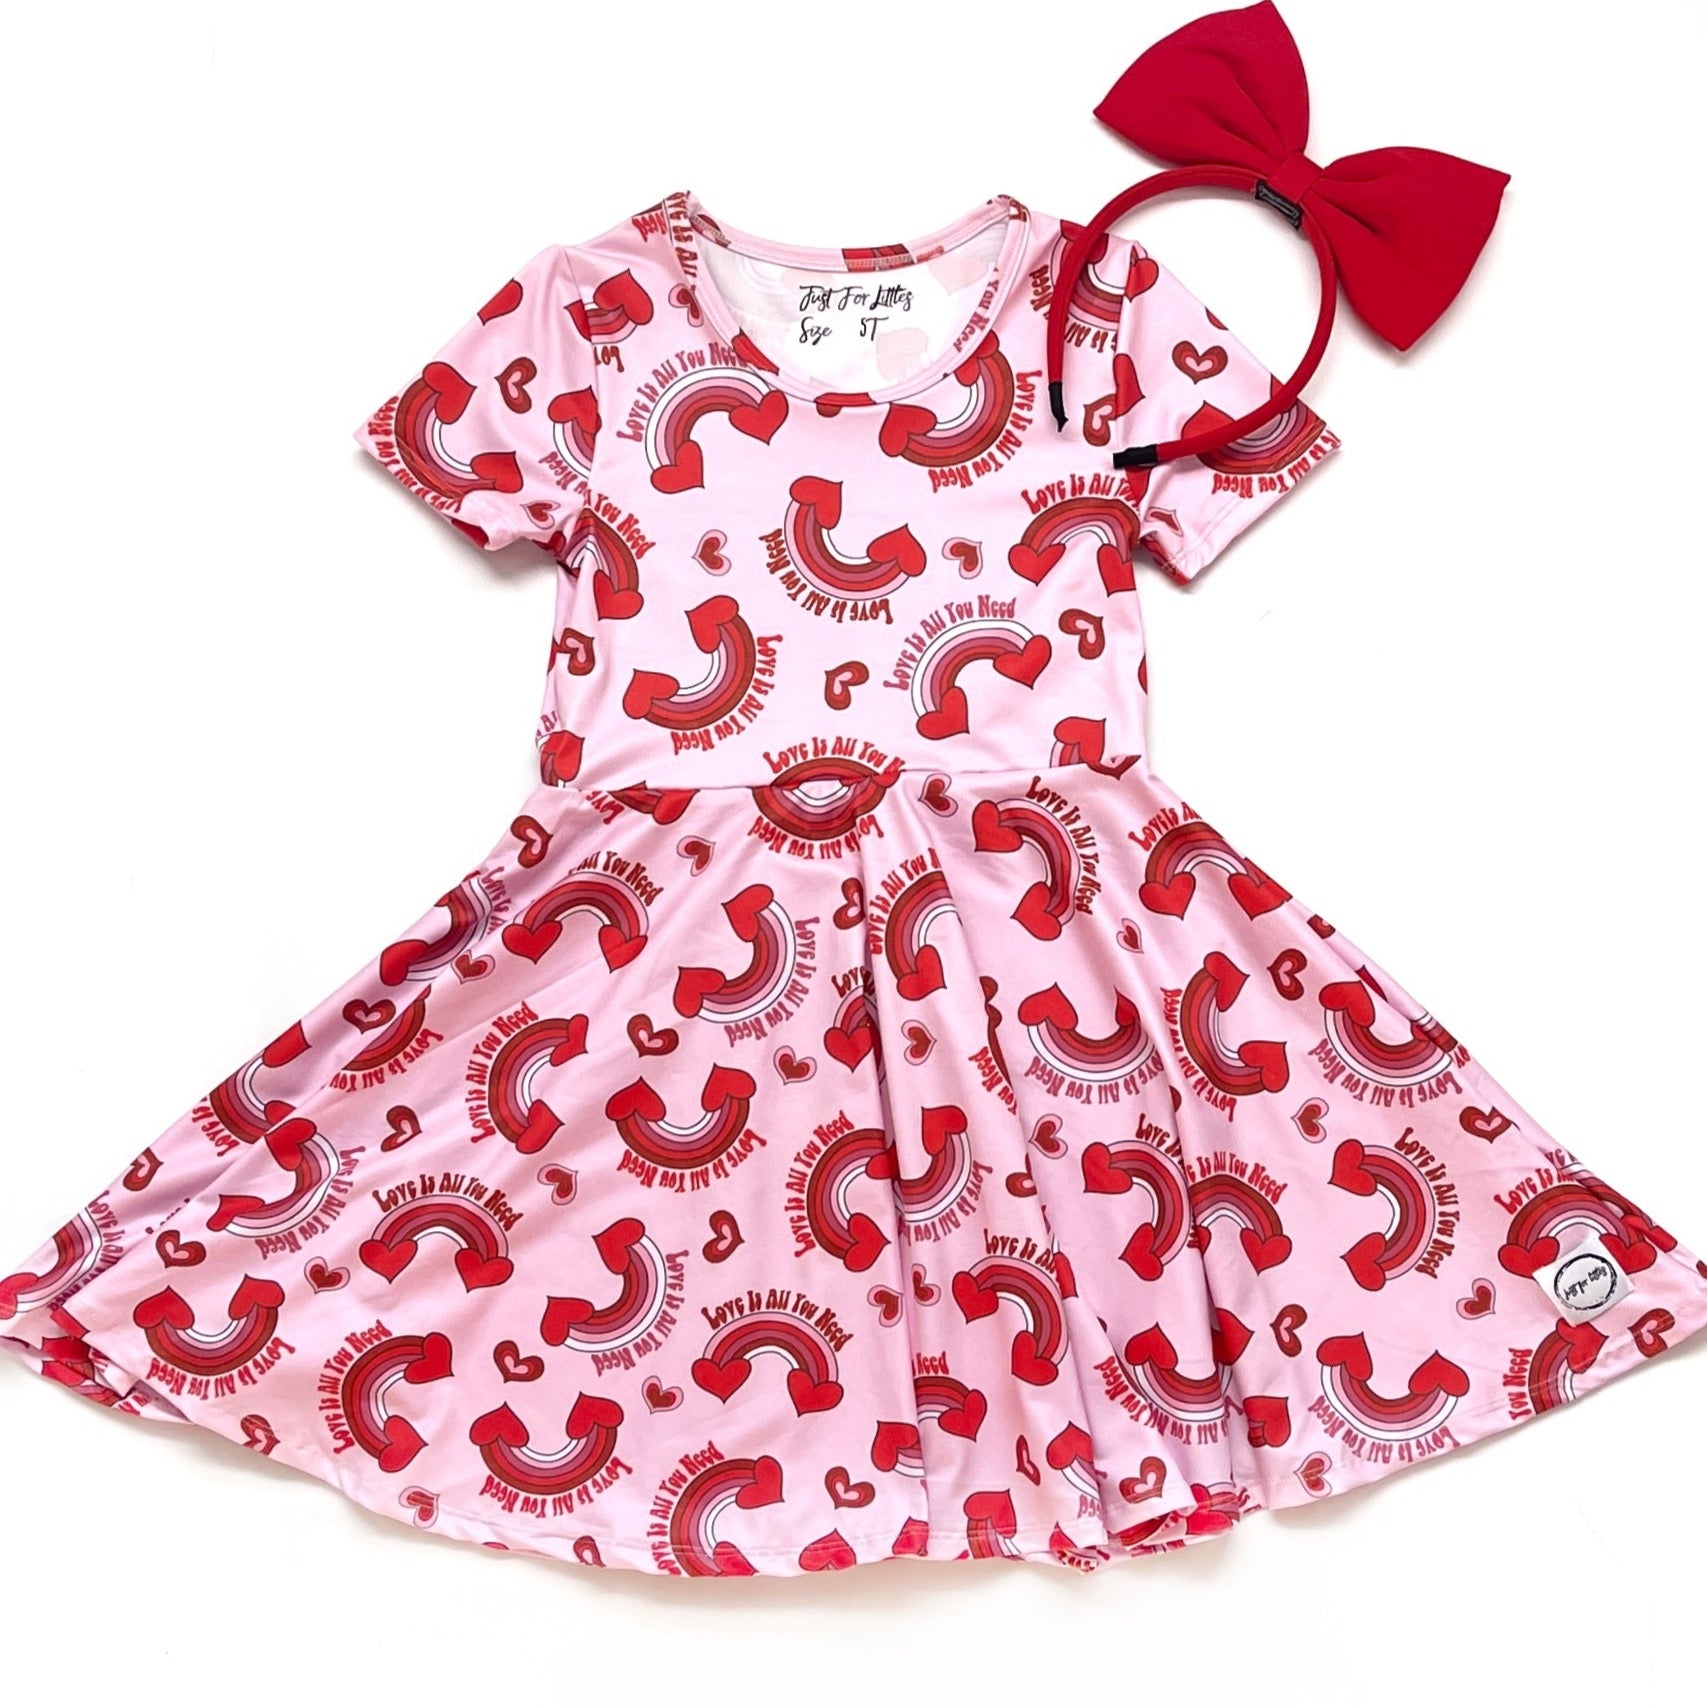 Popilush - Twirling into Valentine's Day with the perfect dress